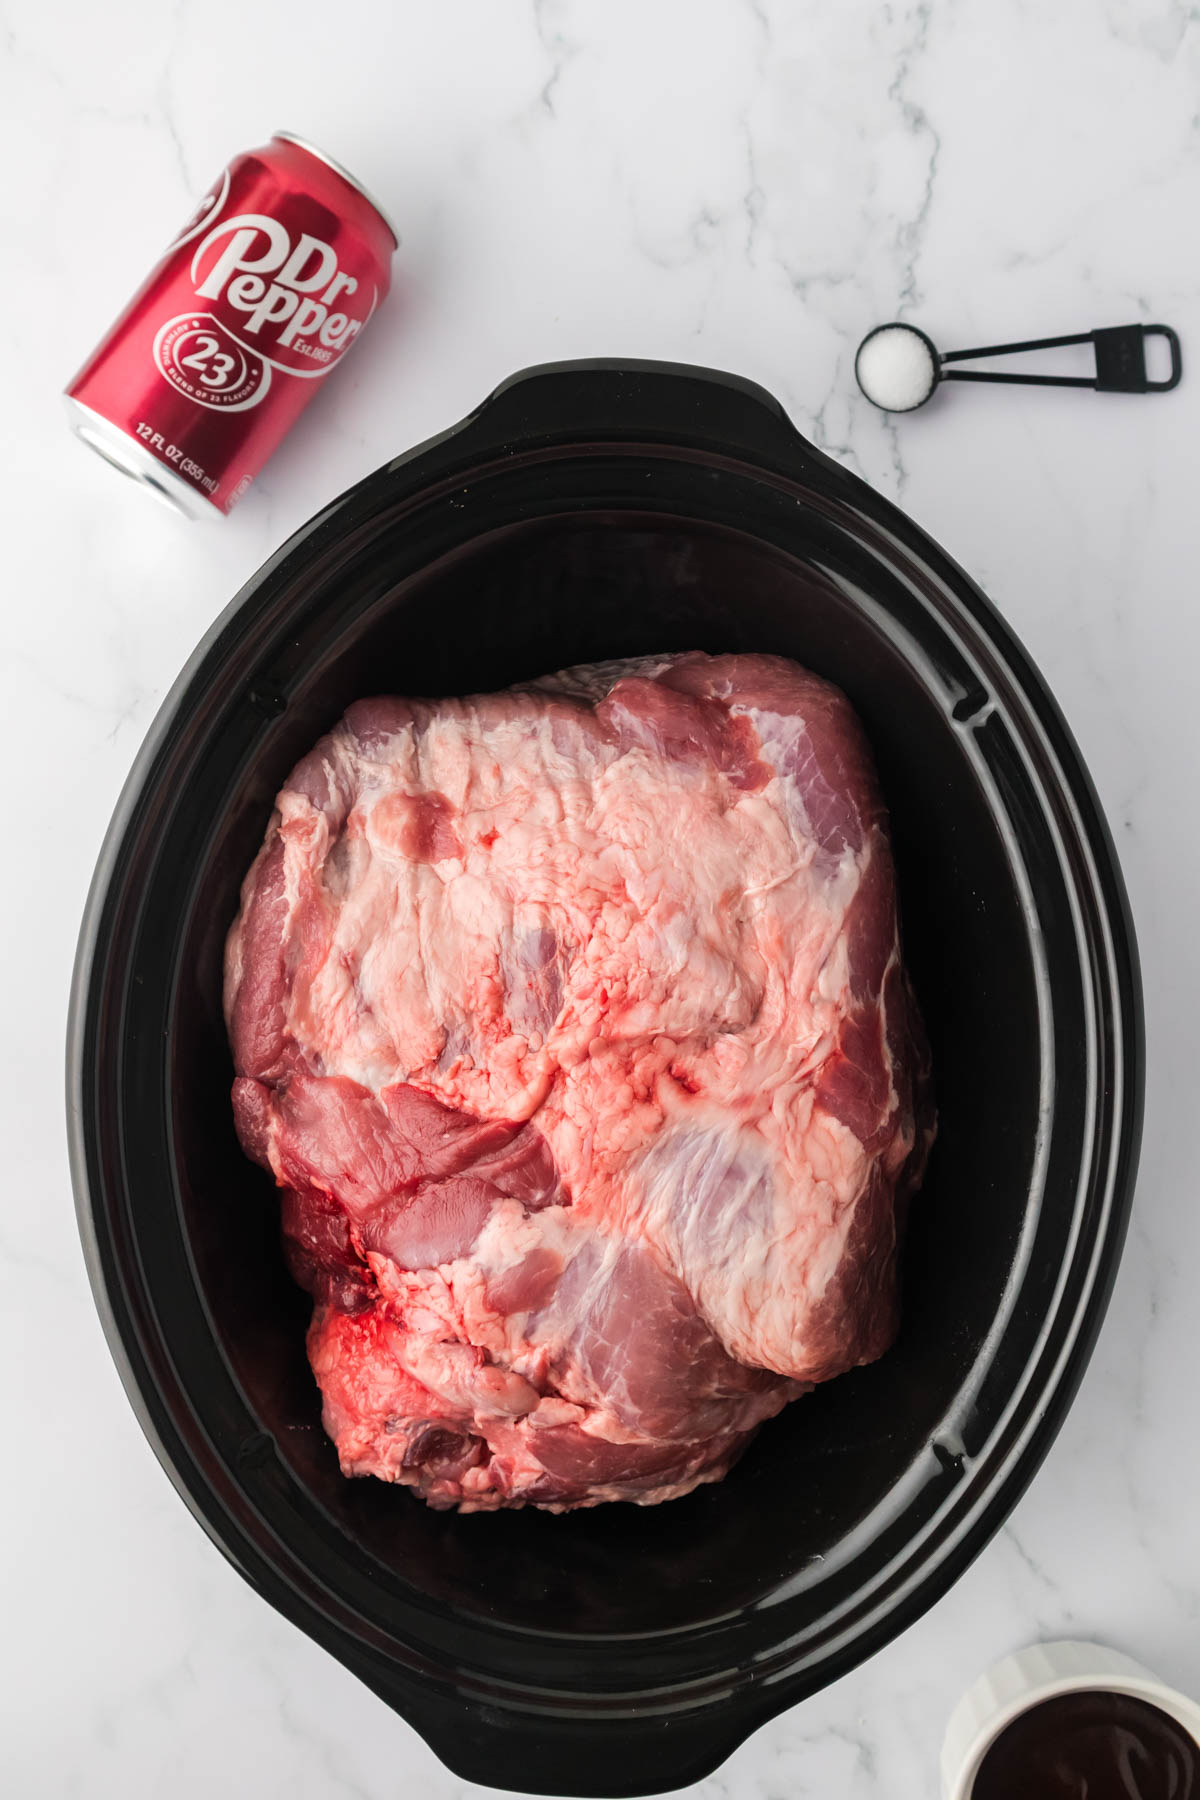 Overhead image of an uncooked pork shoulder in a slow cooker, with a can of Dr Pepper and a measuring spoon full of salt visible at the top of the image. 